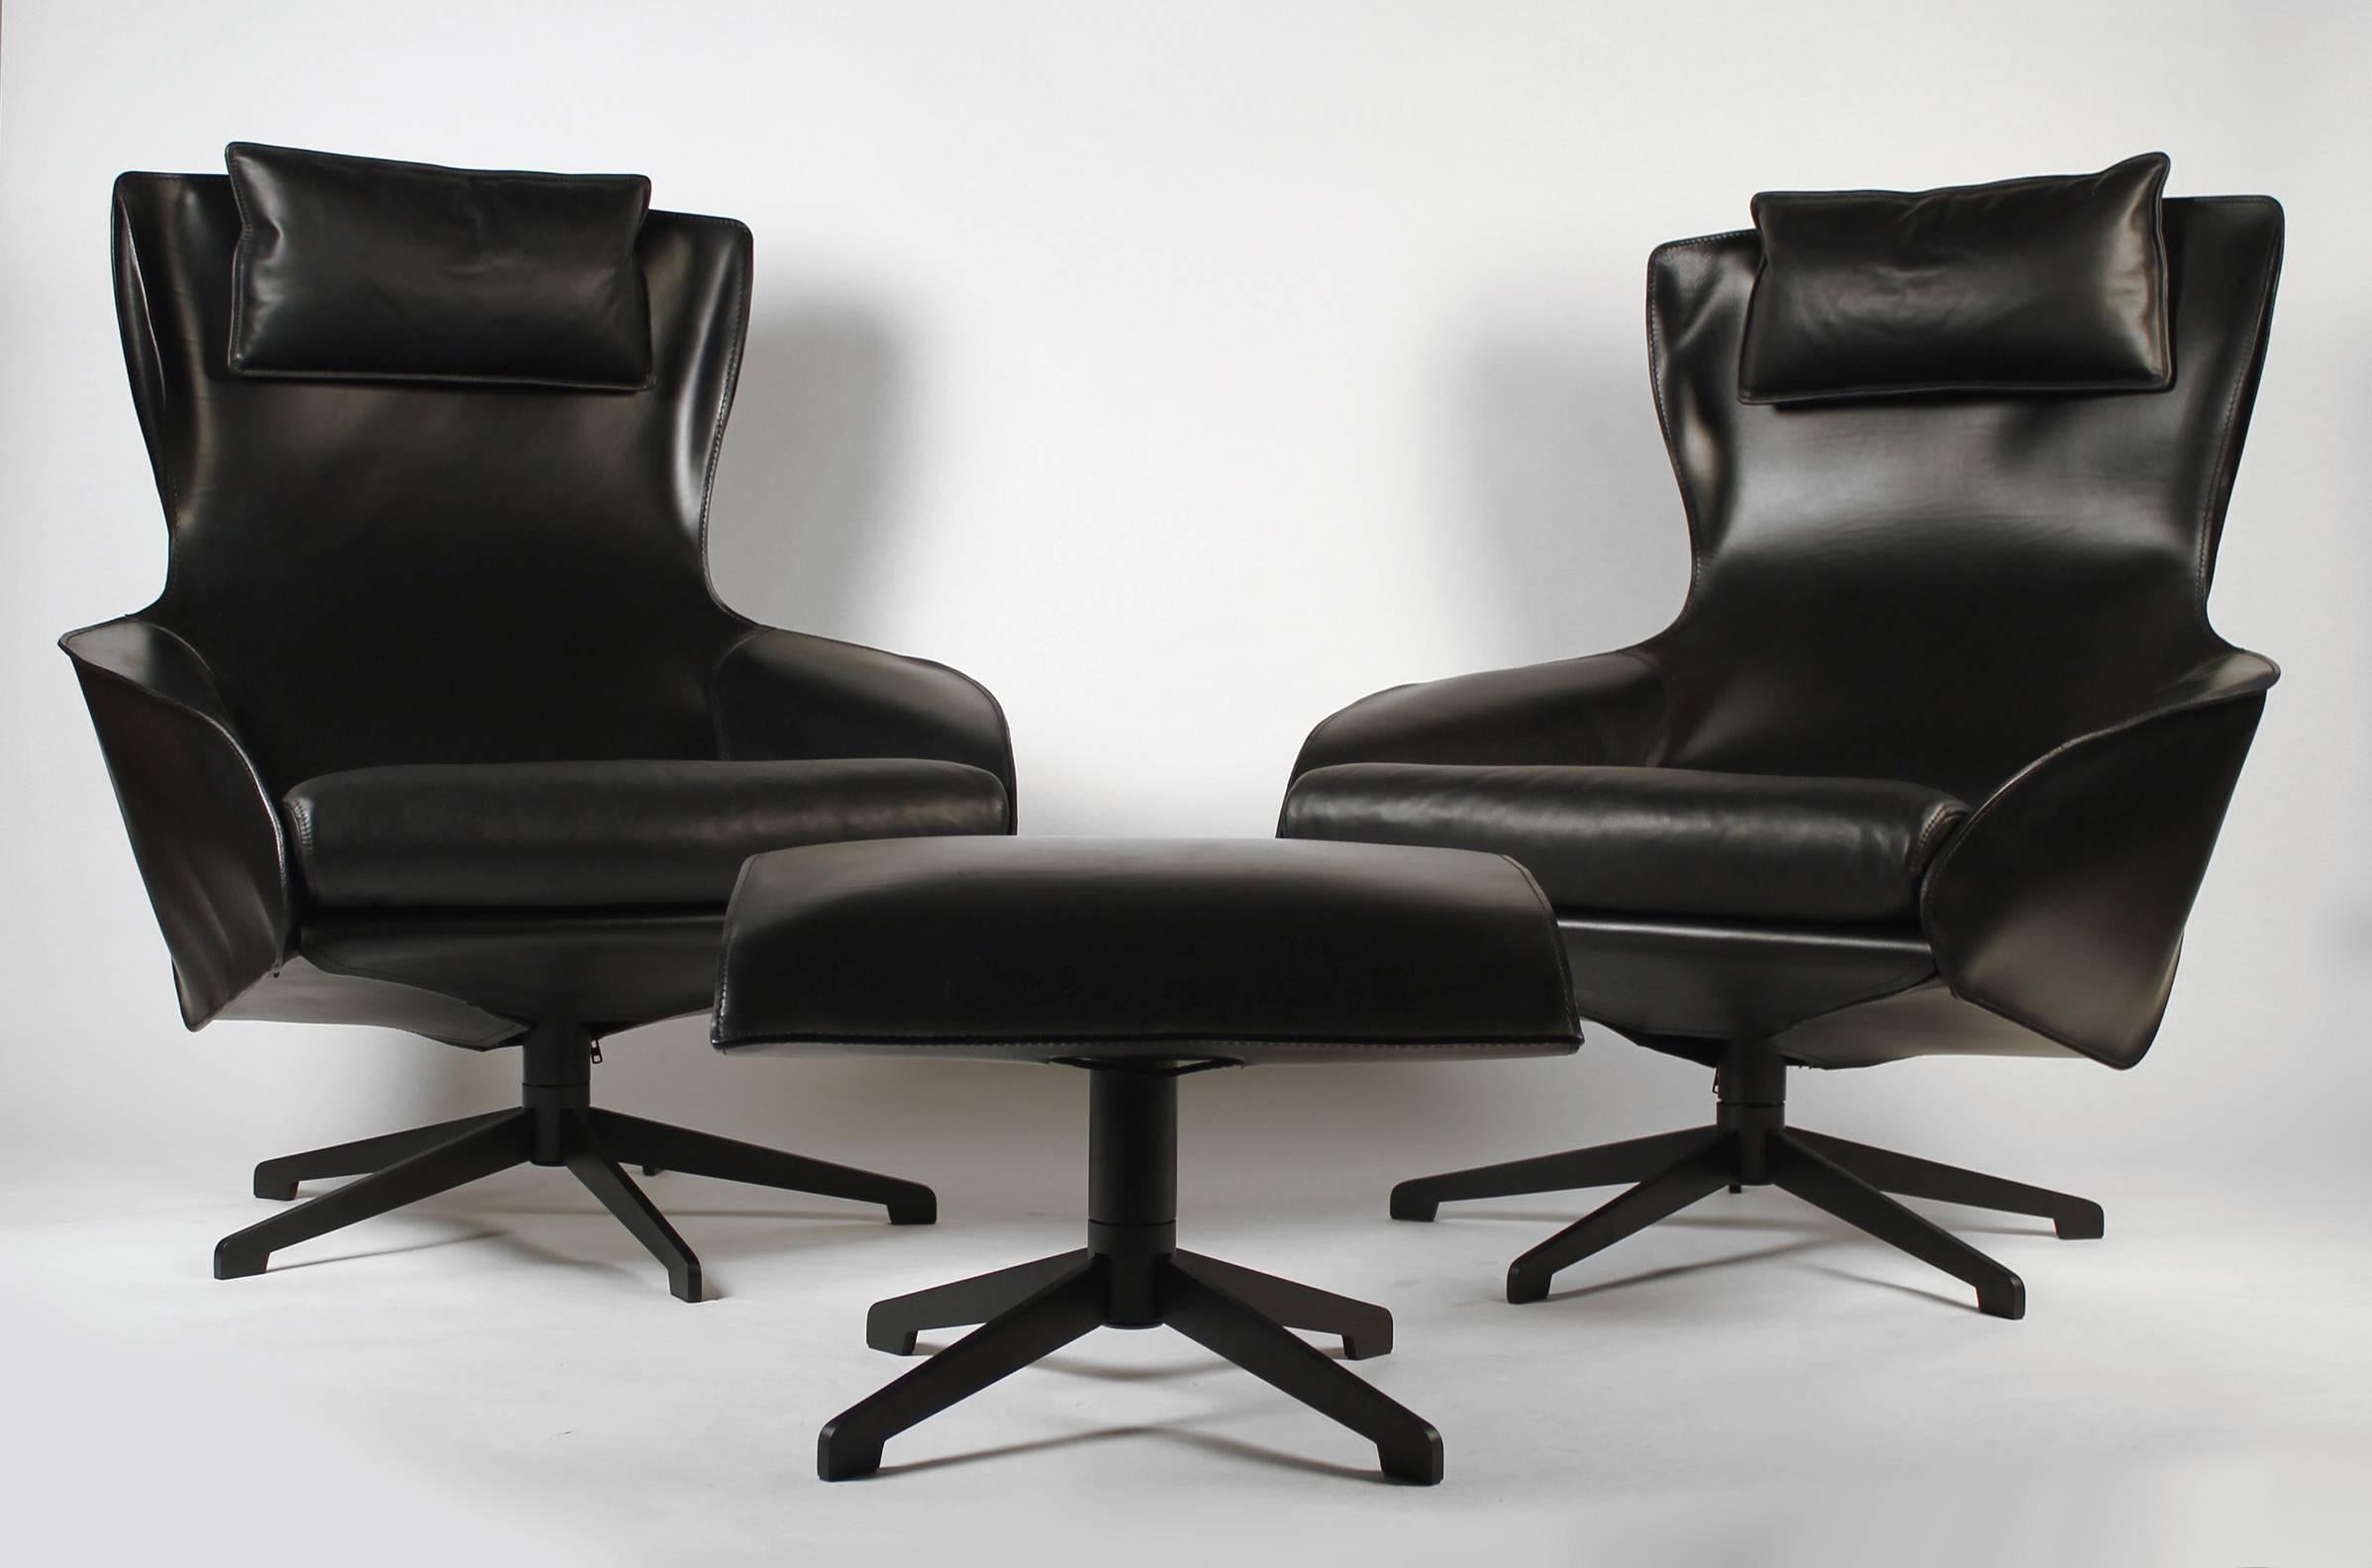 This pair of Mario Bellini model 423 cab lounge chairs are in excellent shape and only show the slightest amount of wear. They look practically brand new. The stitched black leather upholstery with the down-filled pillow gives these chairs a unique